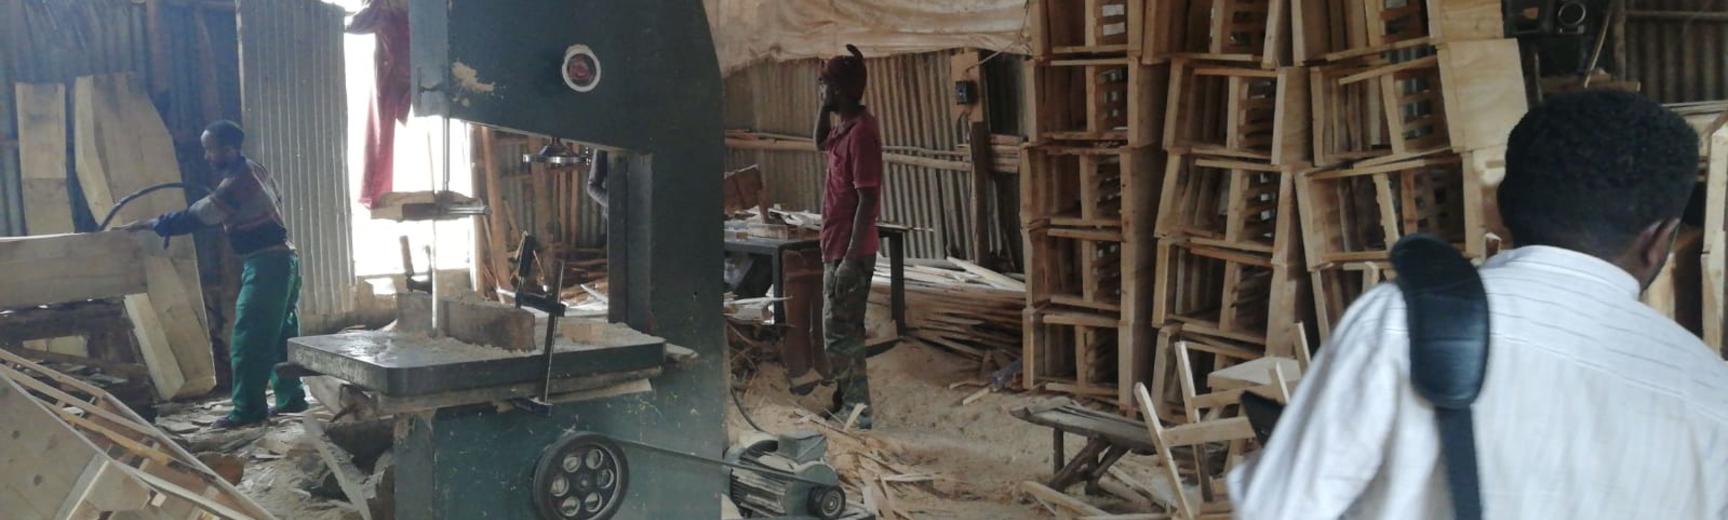 Men working in a messy factory in Addis Ababa